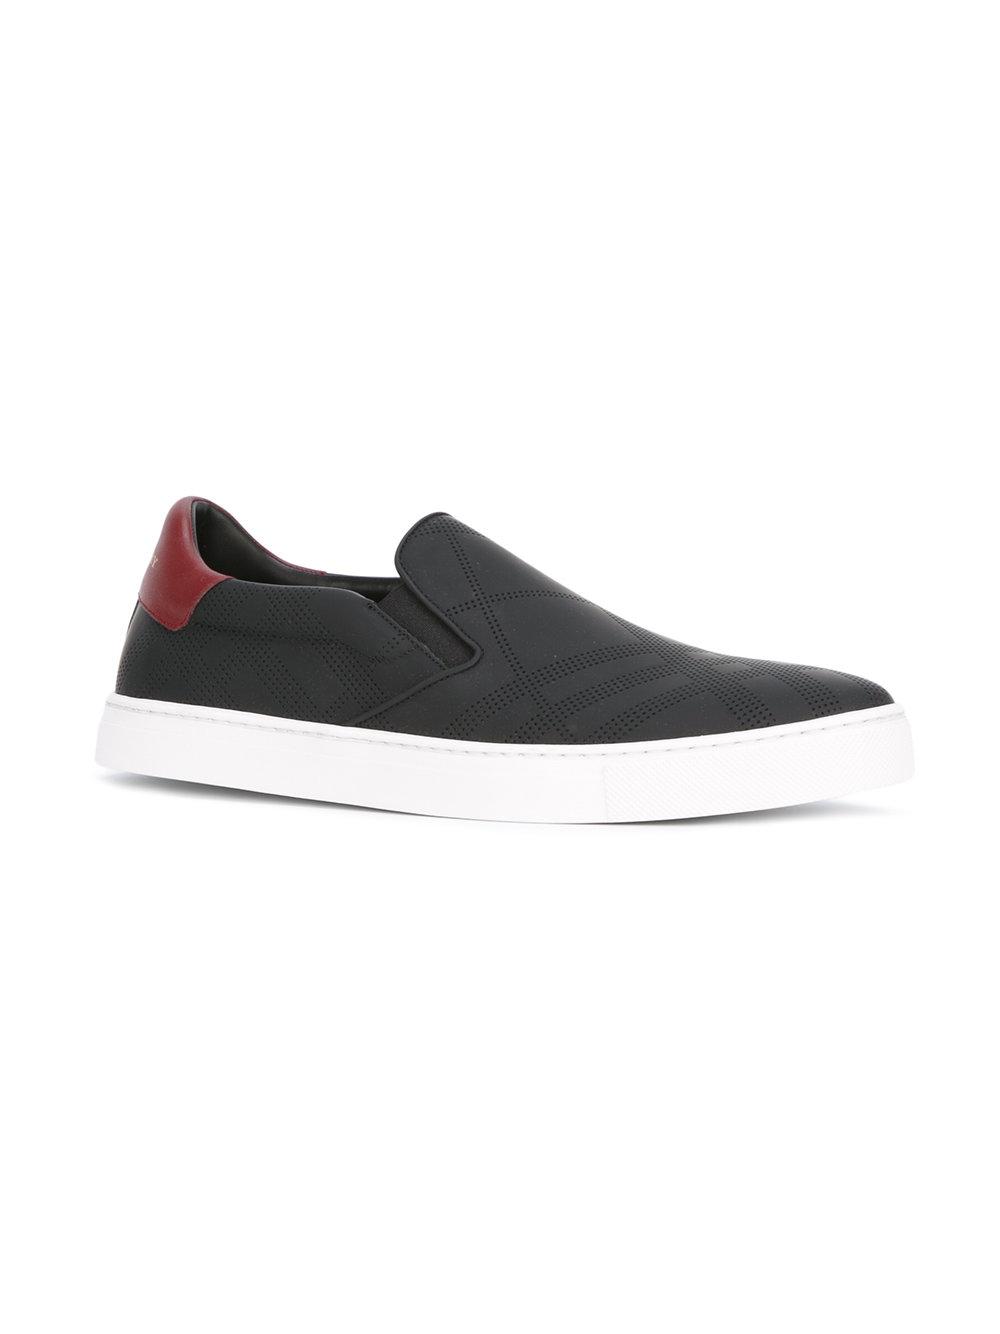 Burberry Leather Slip-on Sneakers in Black for Men - Lyst